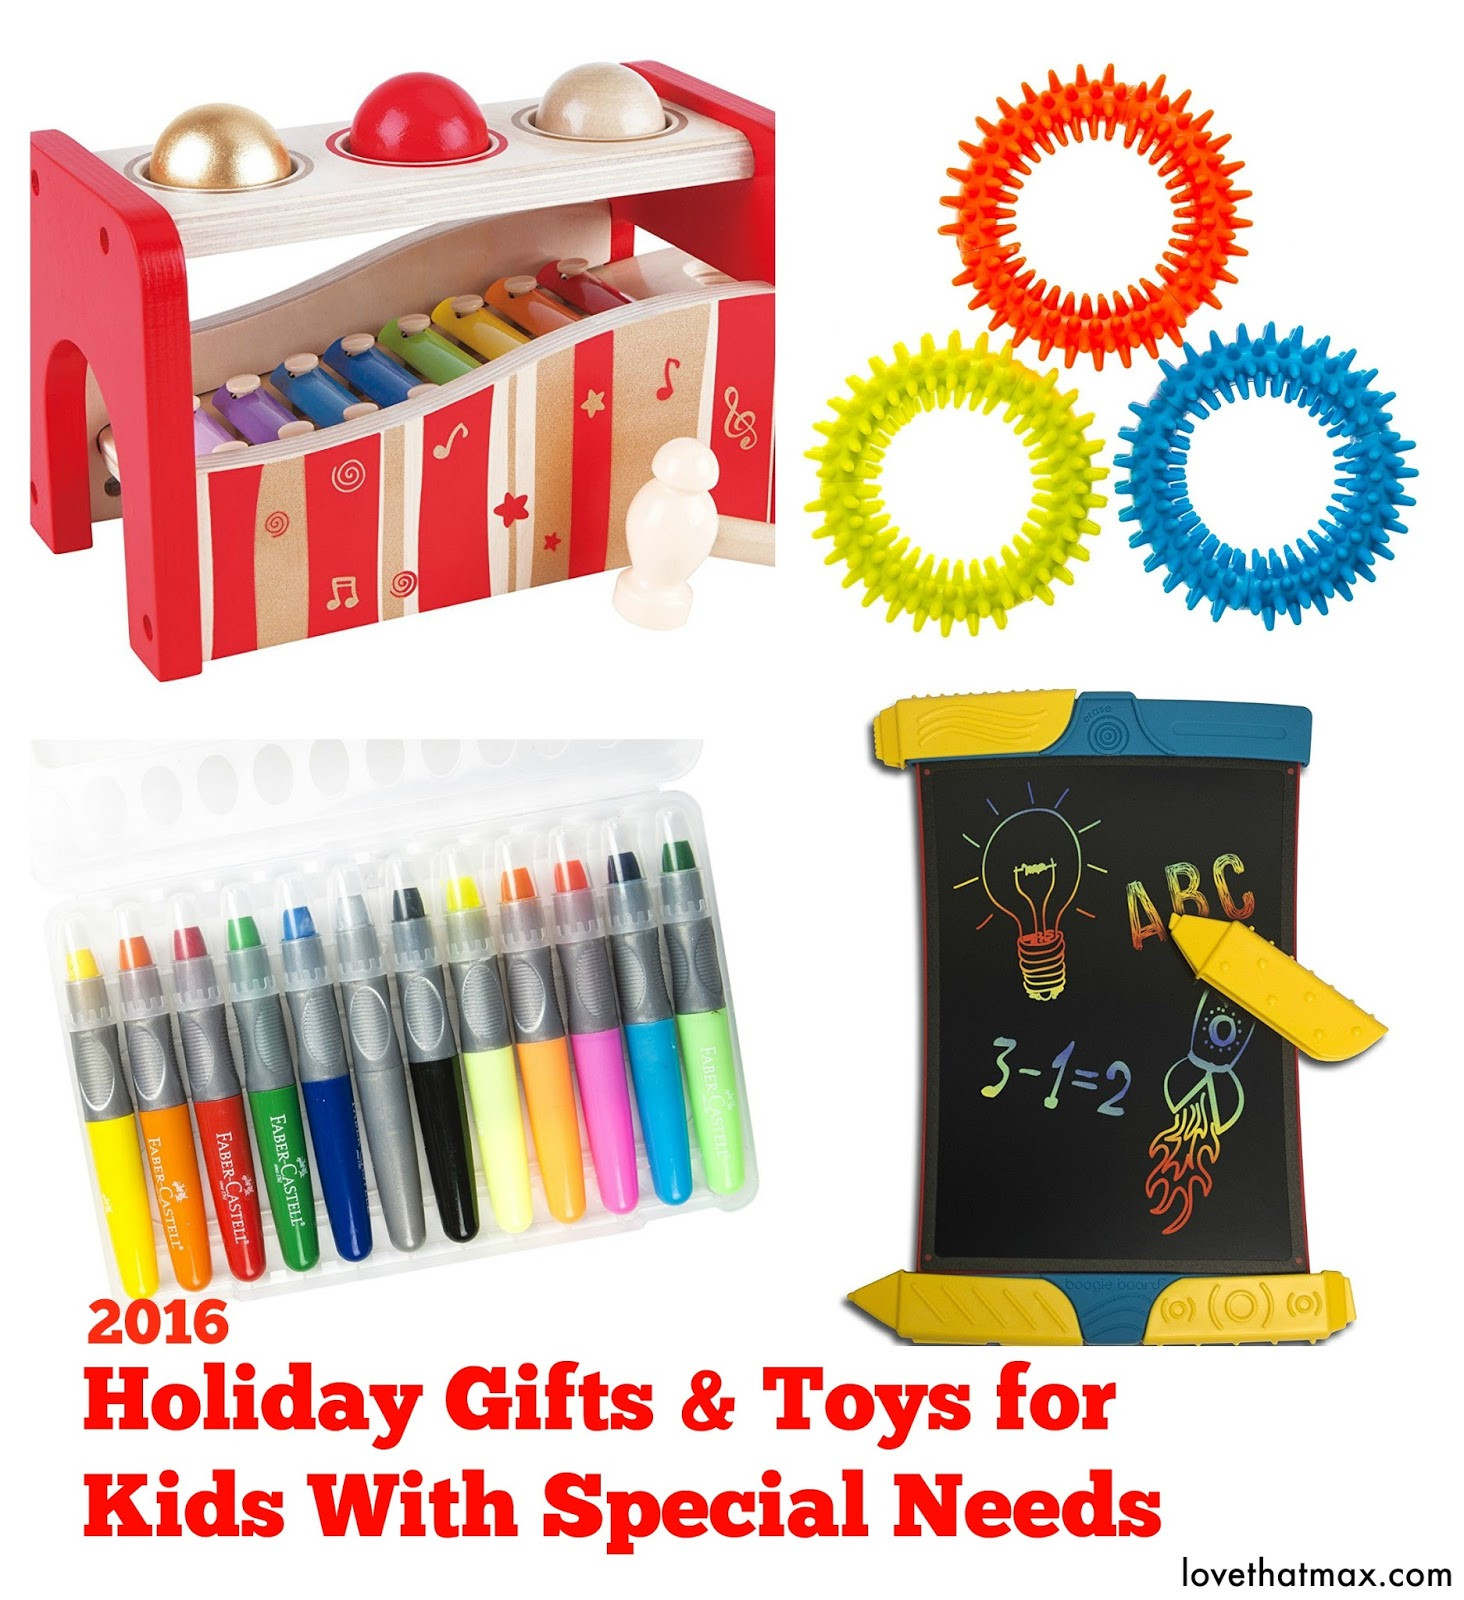 Gifts For Special Needs Kids
 Love That Max Holiday ts and toys for kids with